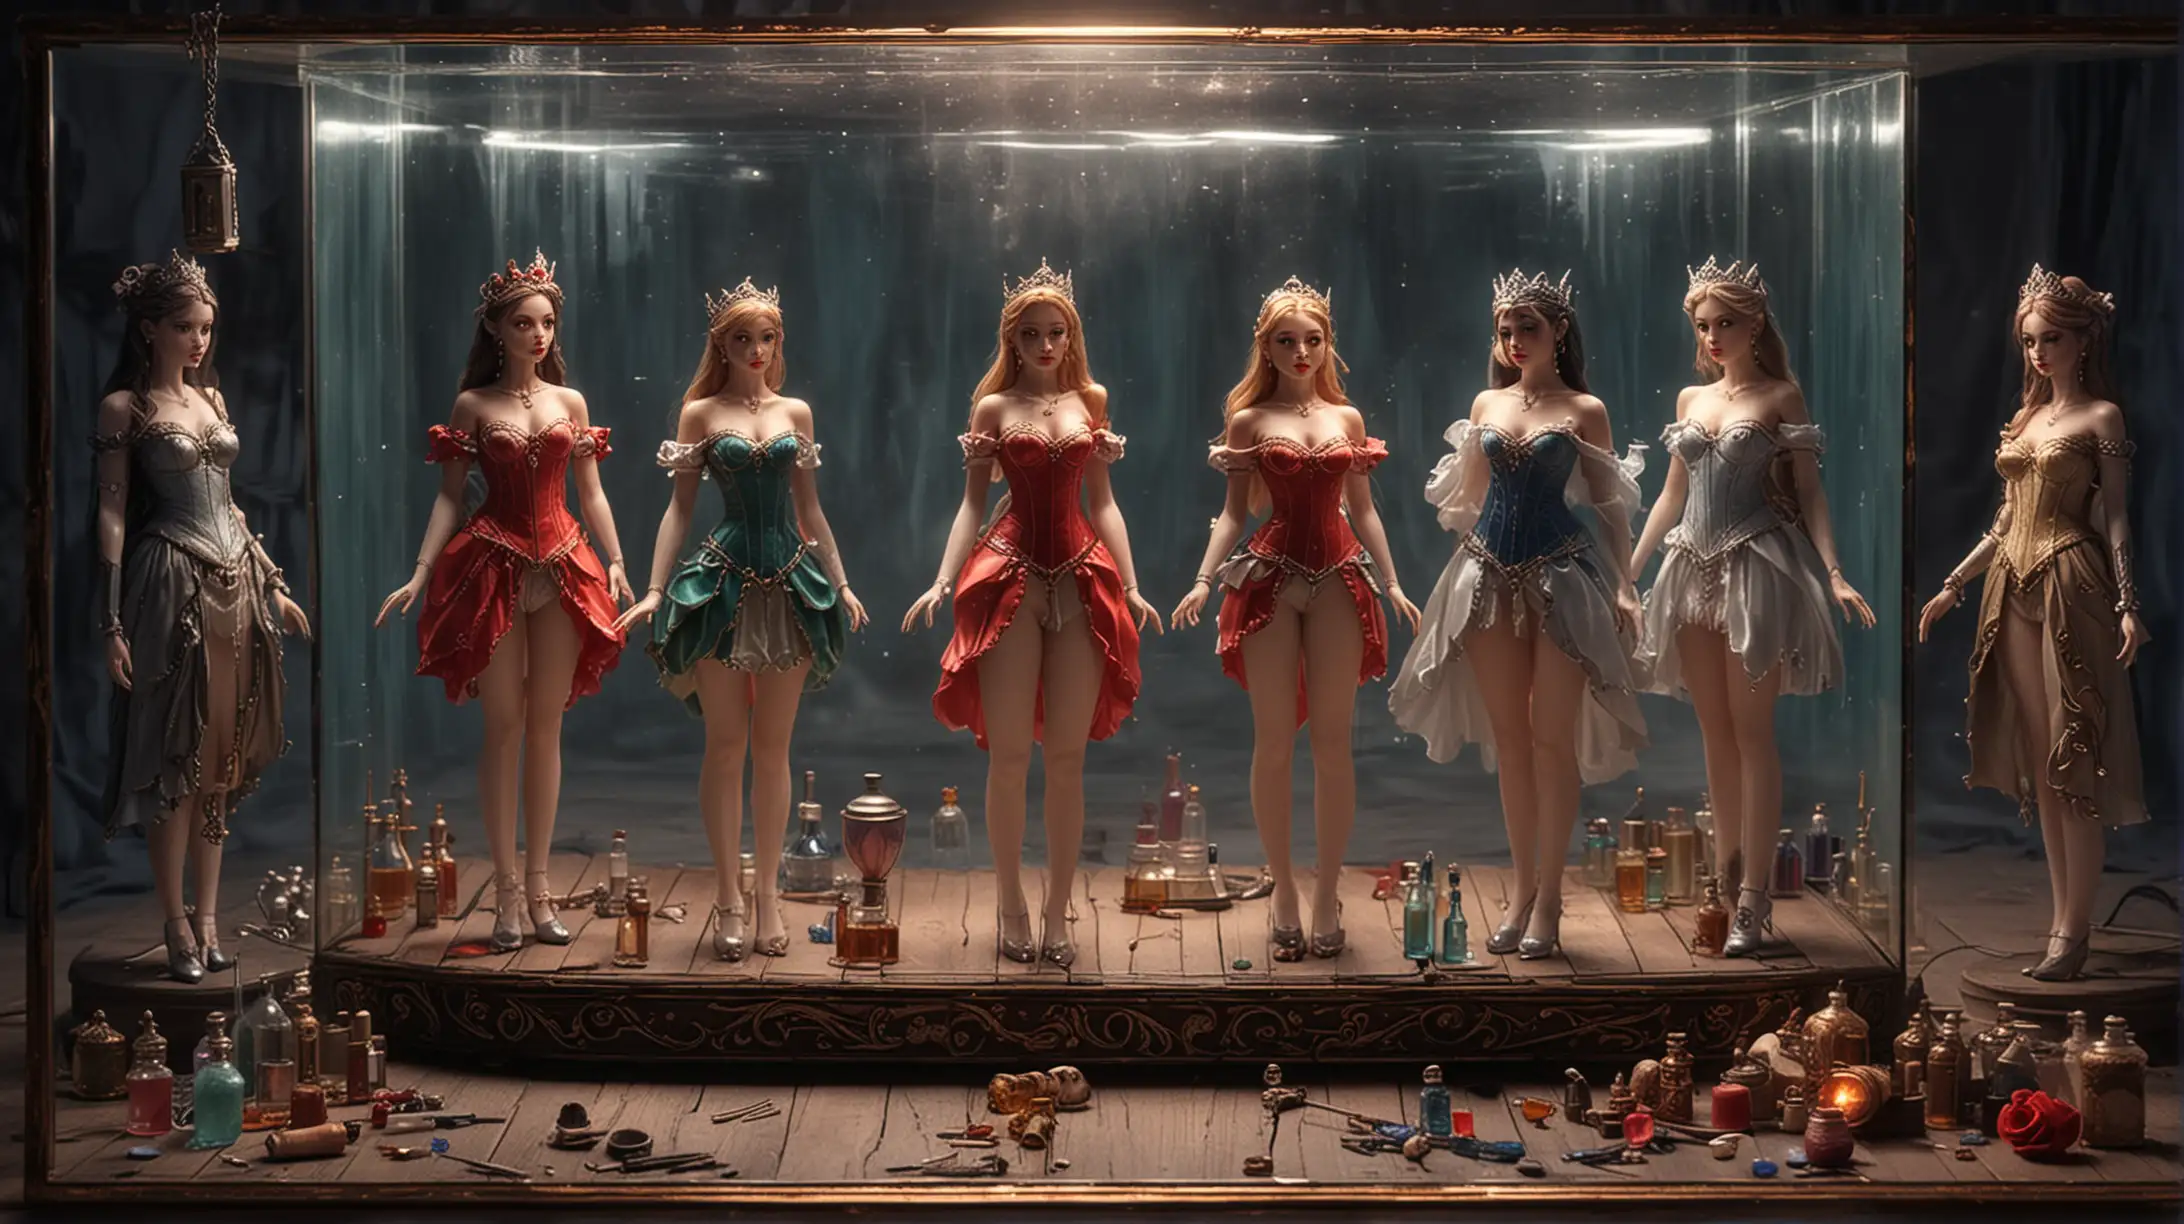 Miniature Princesses in Alchemists Lab with Glowing Glass Box